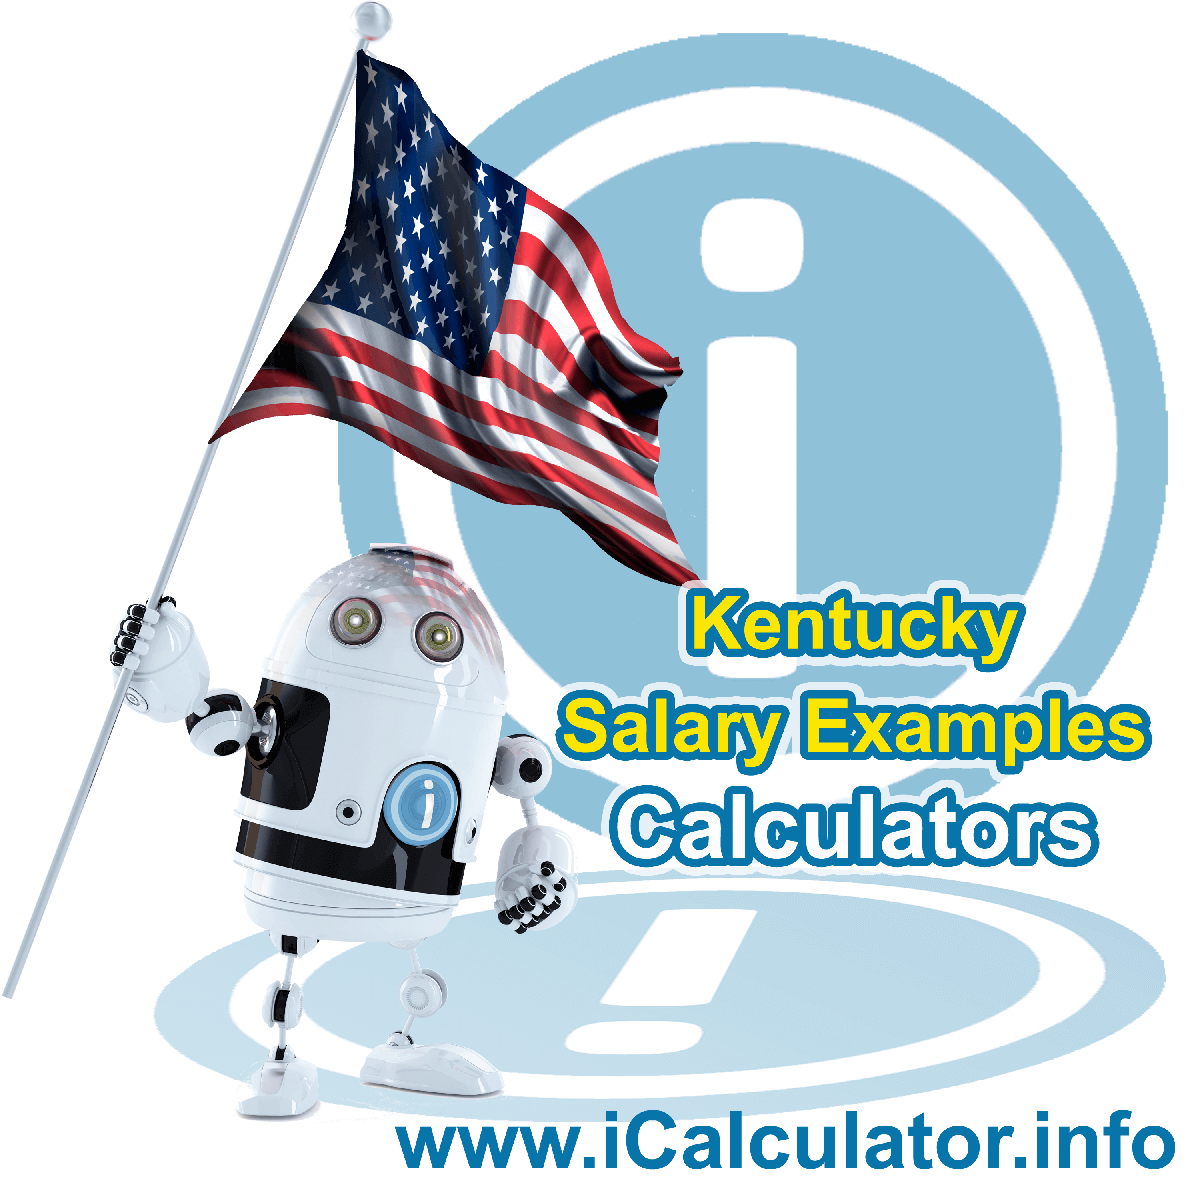 Kentucky Salary Example for $ 20,000.00 in 2023 | iCalculator™ | $ 20,000.00 salary example for employee and employer paying Kentucky State tincome taxes. Detailed salary after tax calculation including Kentucky State Tax, Federal State Tax, Medicare Deductions, Social Security, Capital Gains and other income tax and salary deductions complete with supporting Kentucky state tax tables 